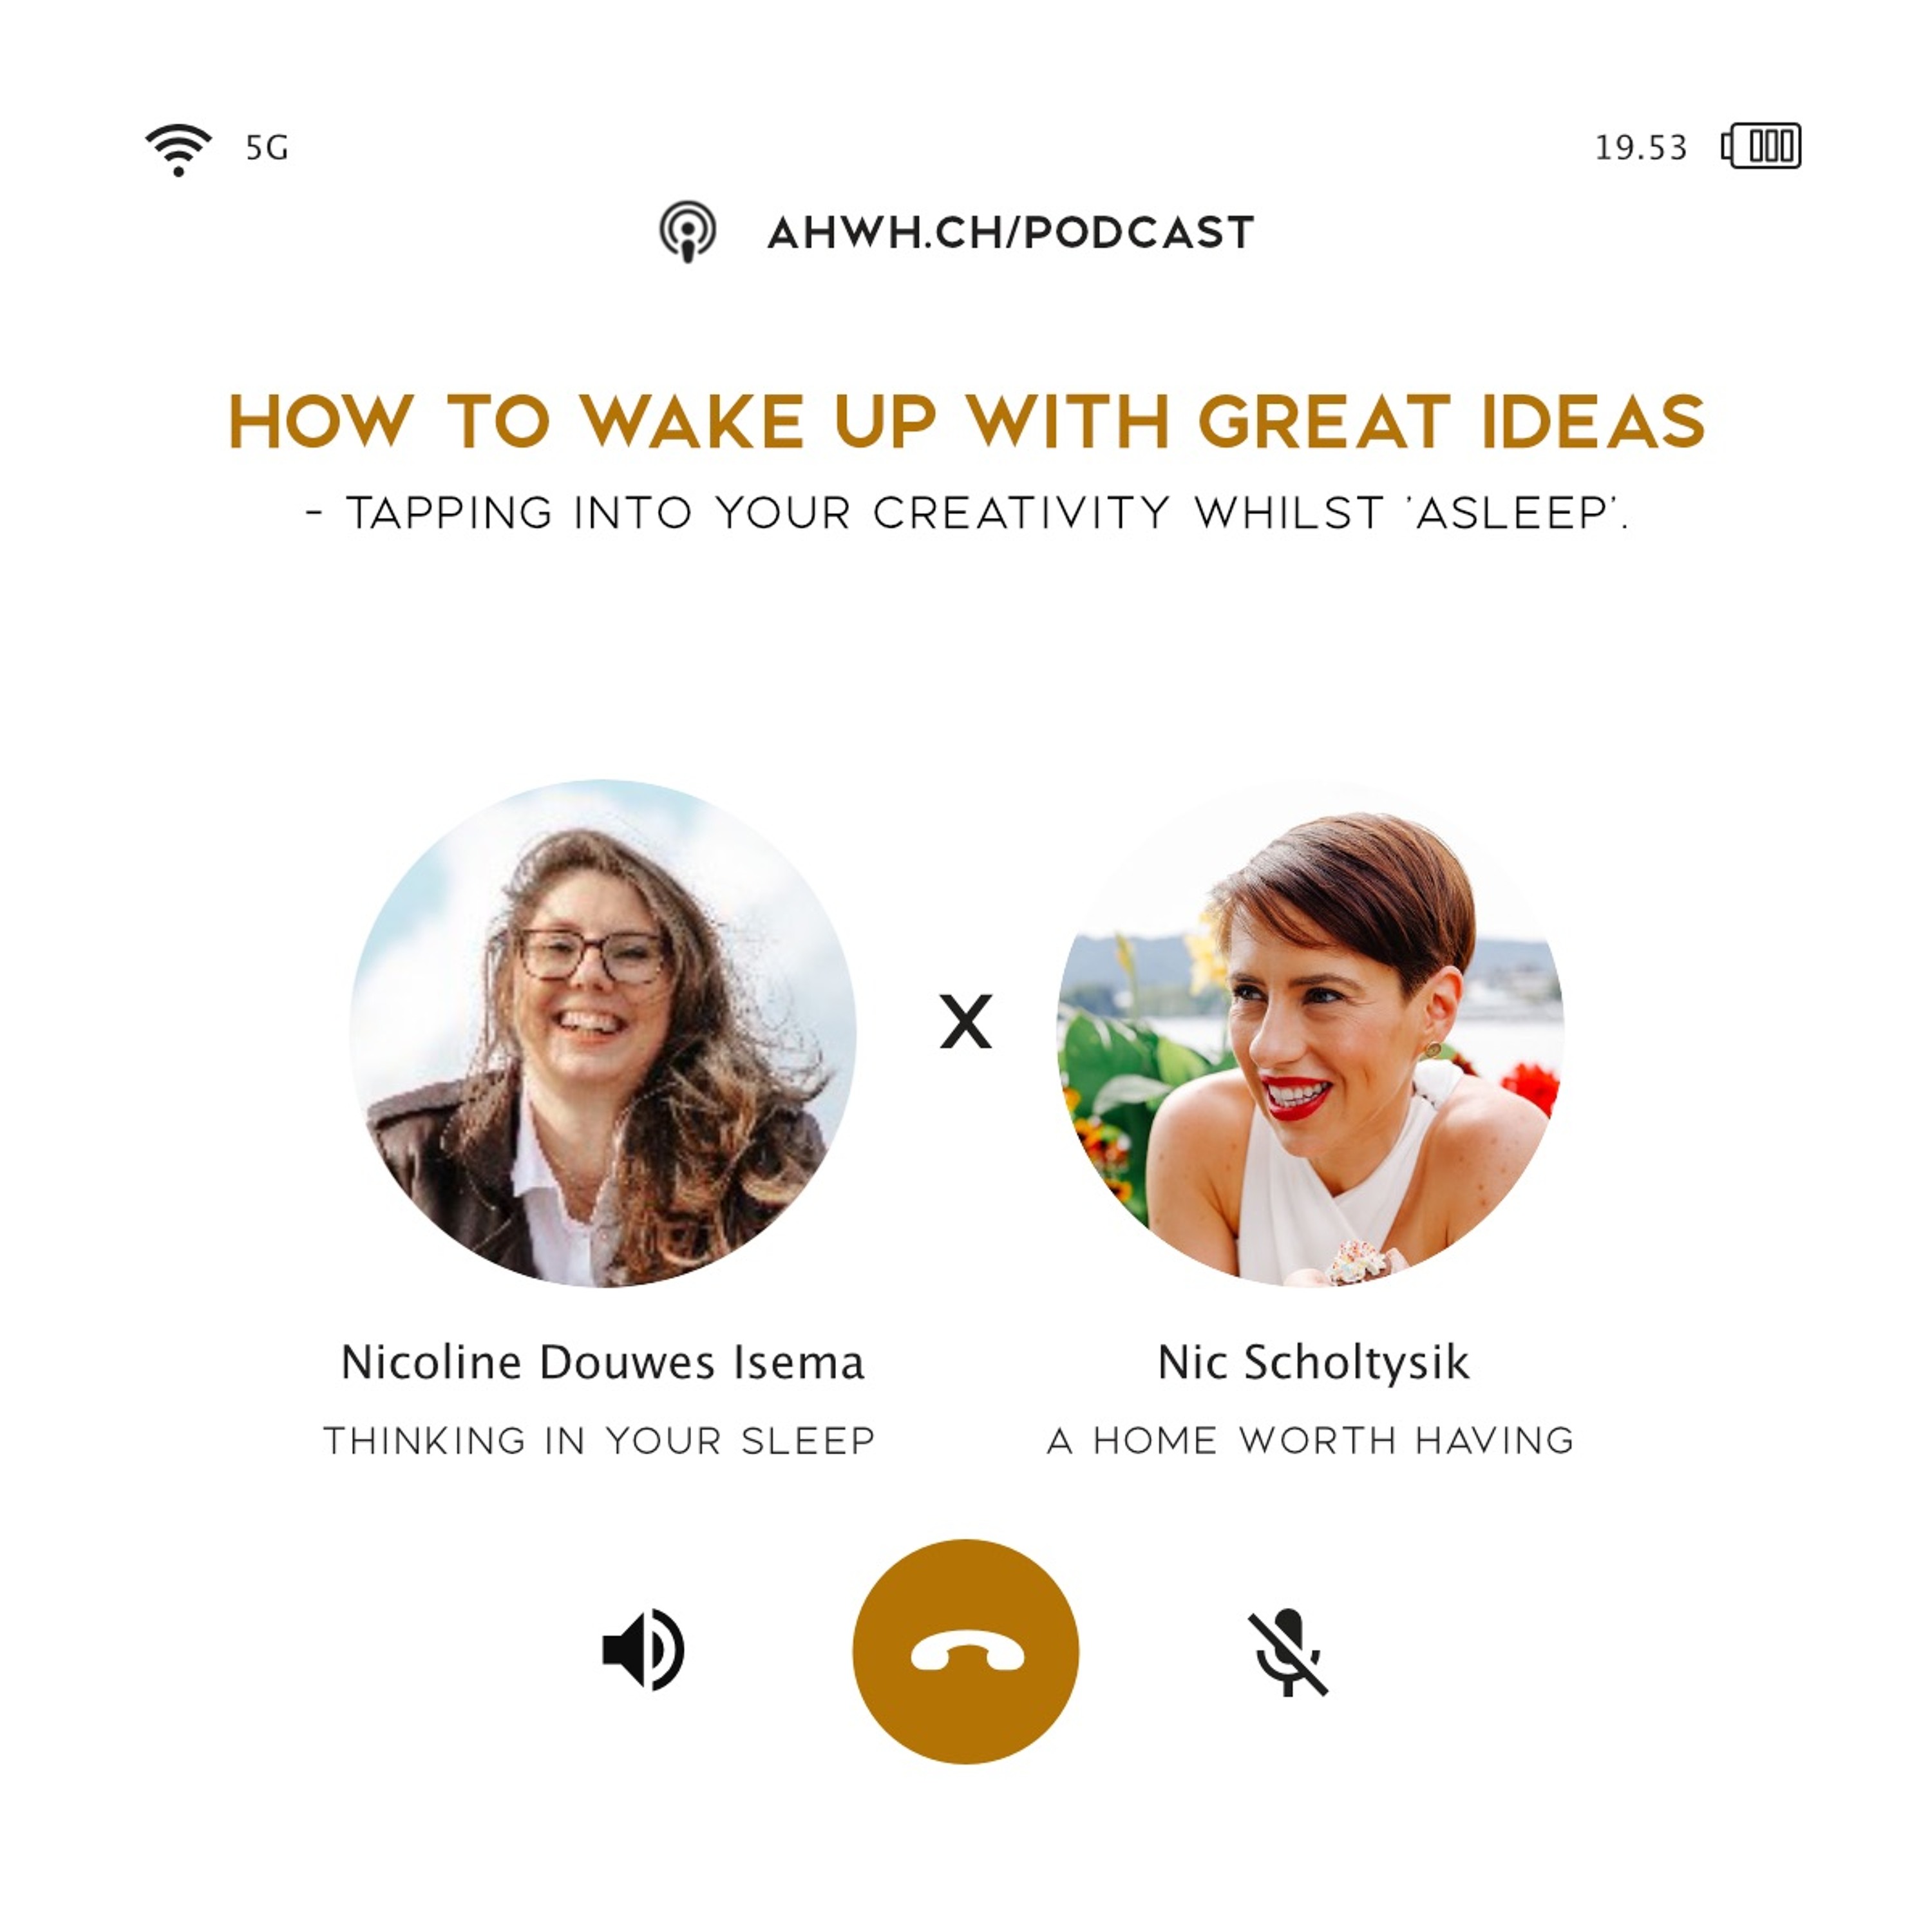 How to wake up with great ideas - leveraging your creativity when you can’t find inspiration first.